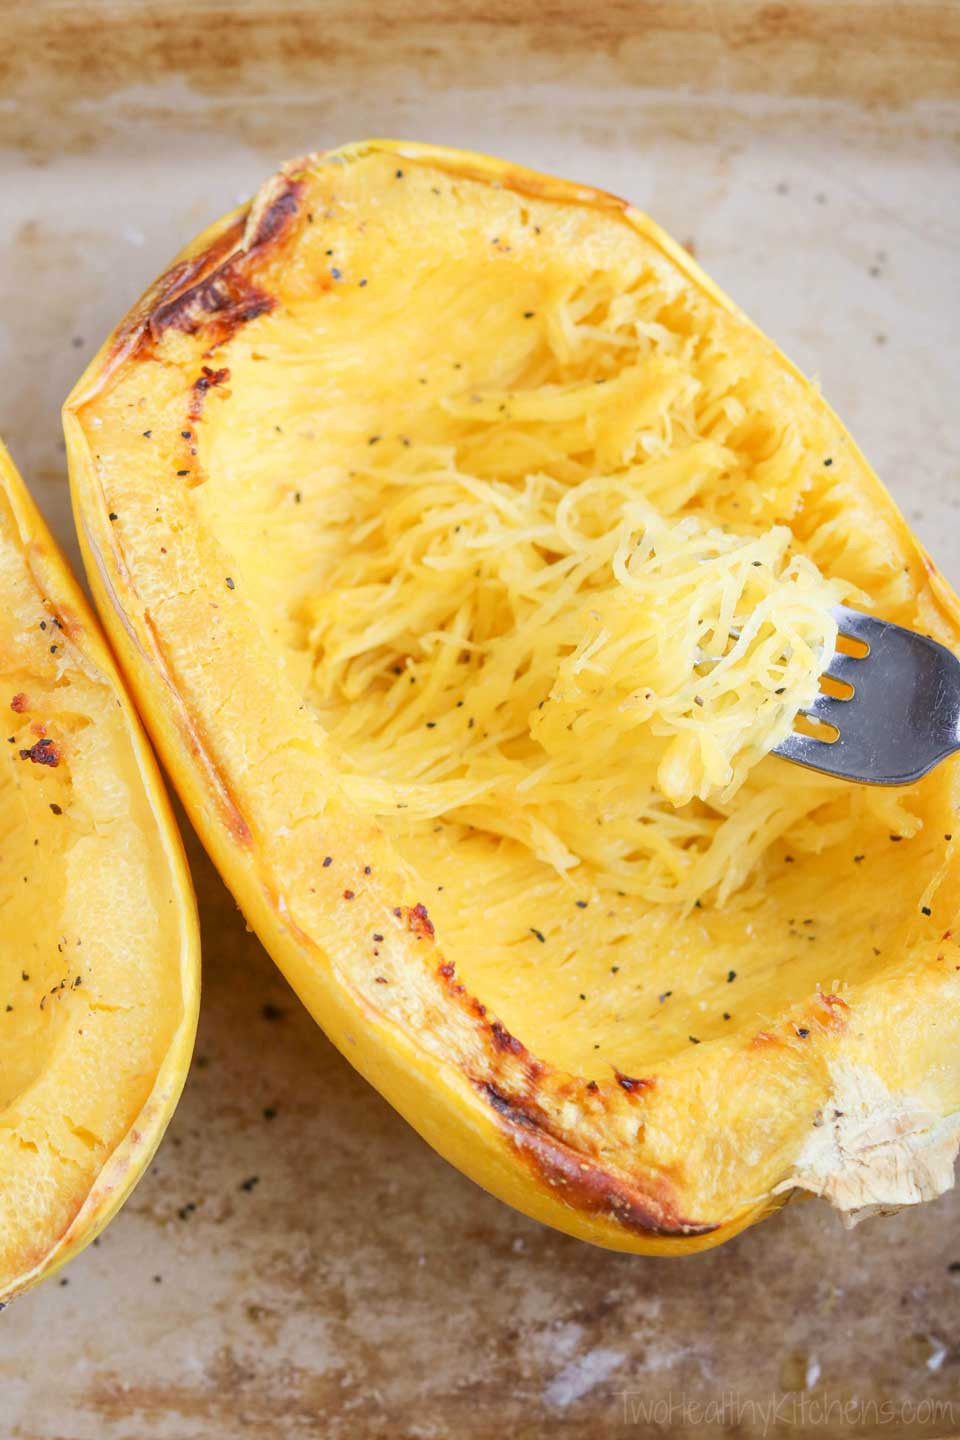 Microwaved Spaghetti Squash
 Microwave Spaghetti Squash with Sage Browned Butter and